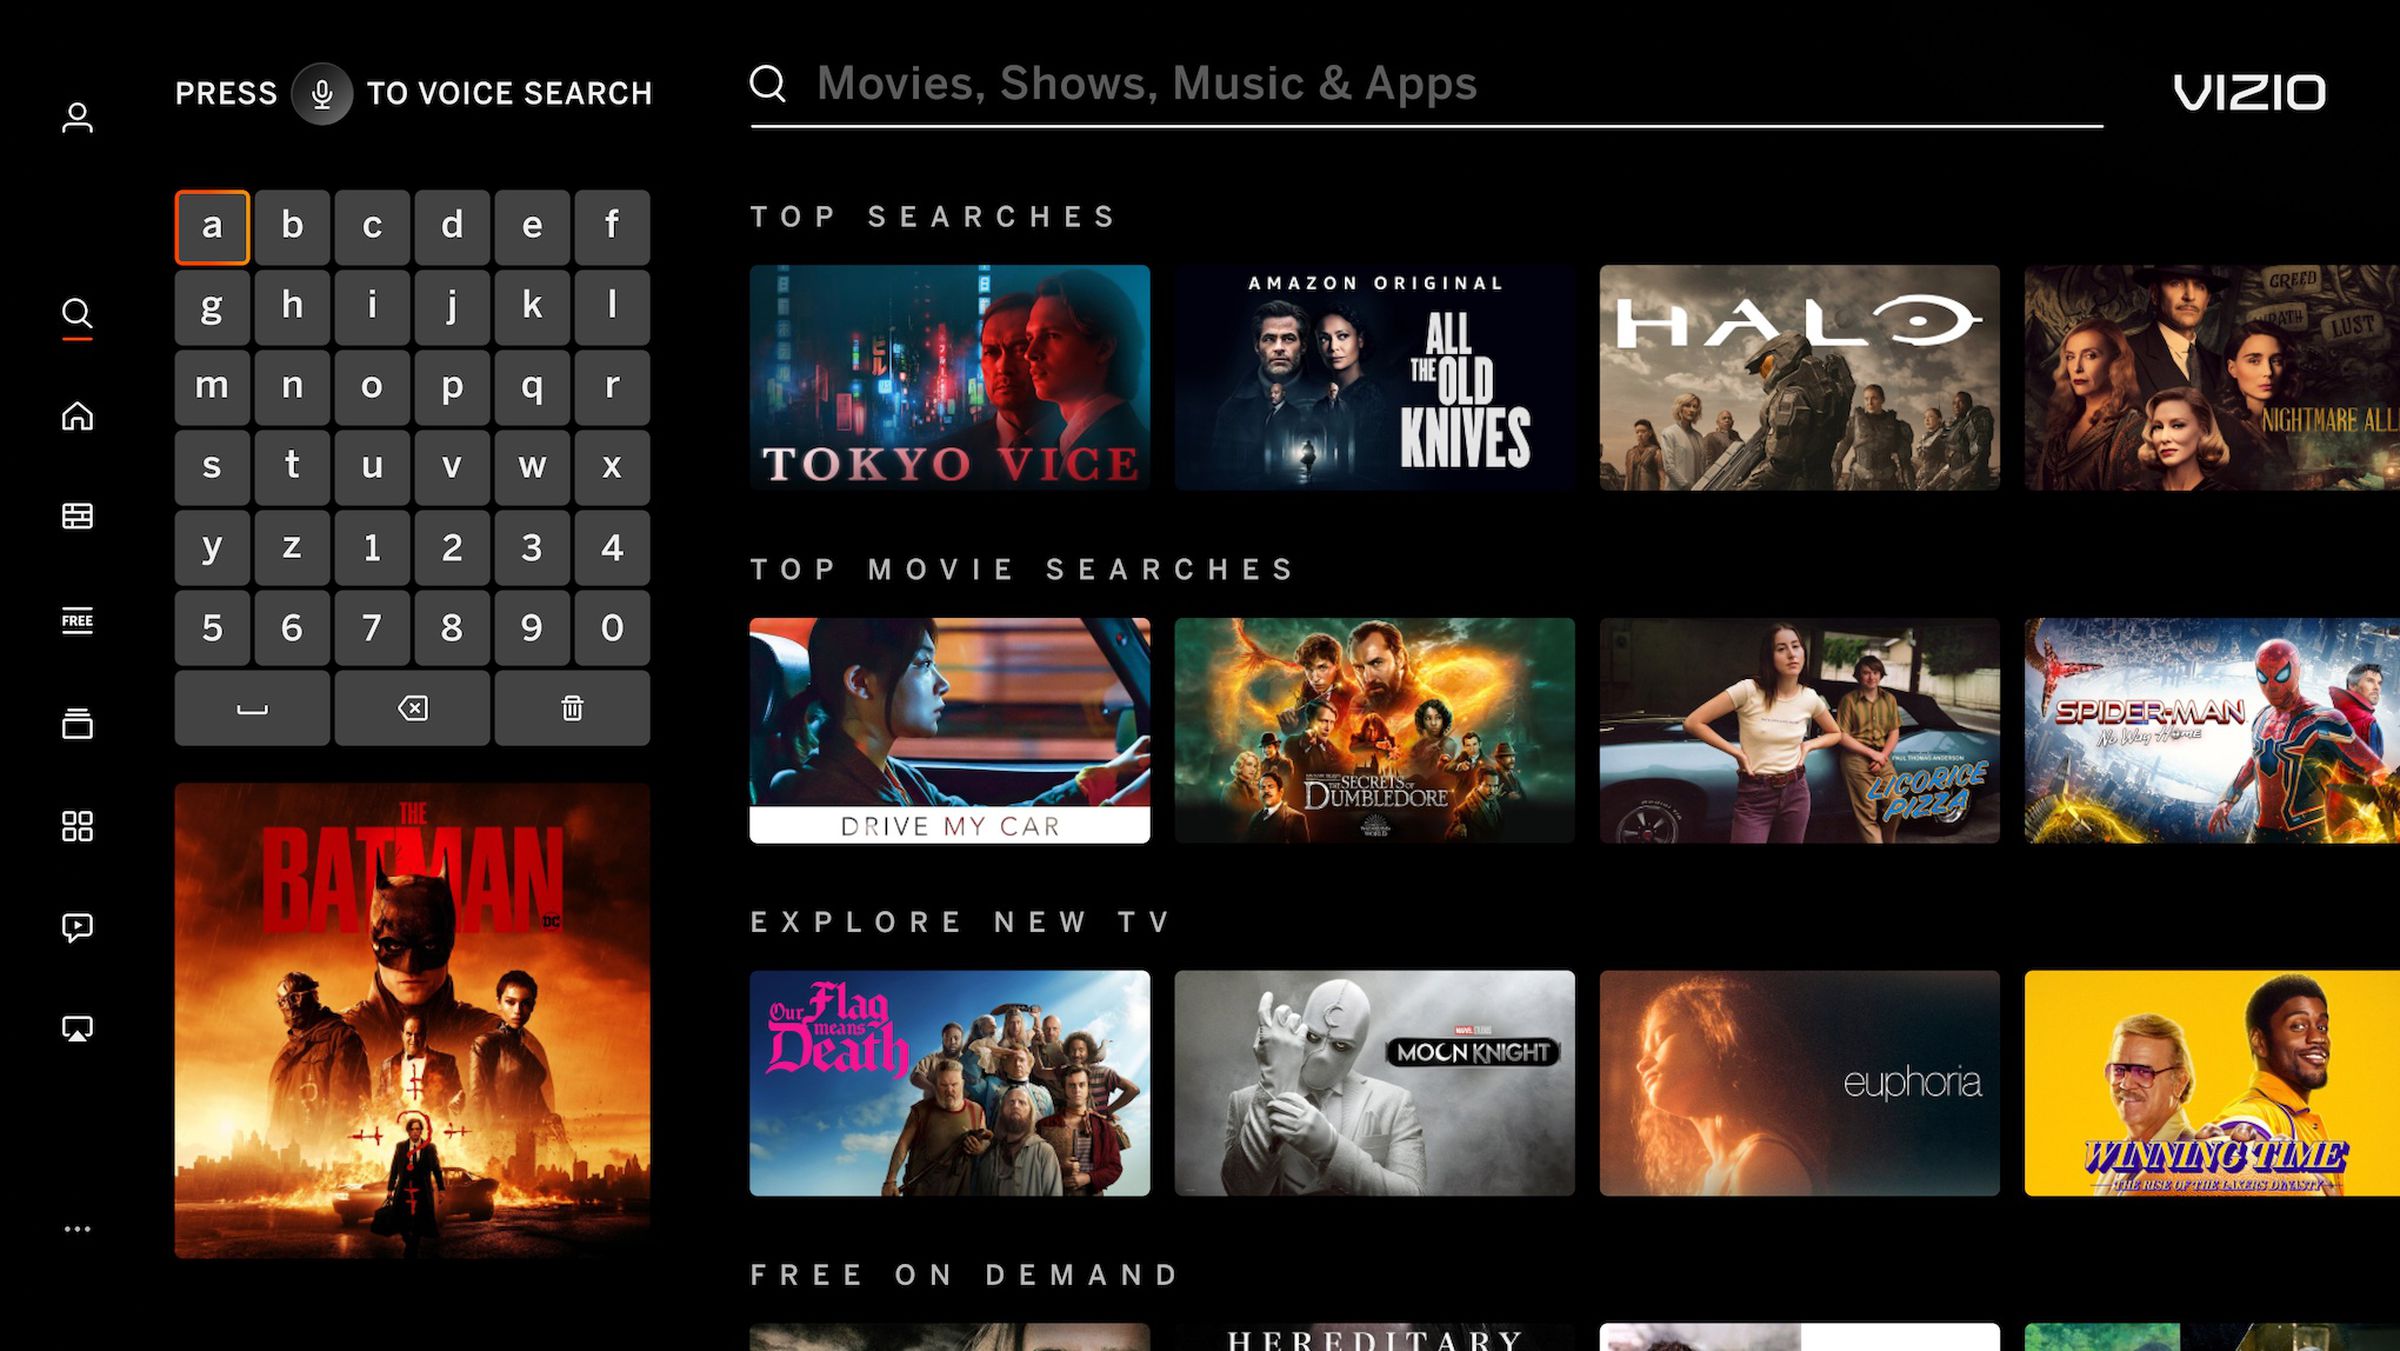 A screenshot of the search experience on Vizio Home Screen.